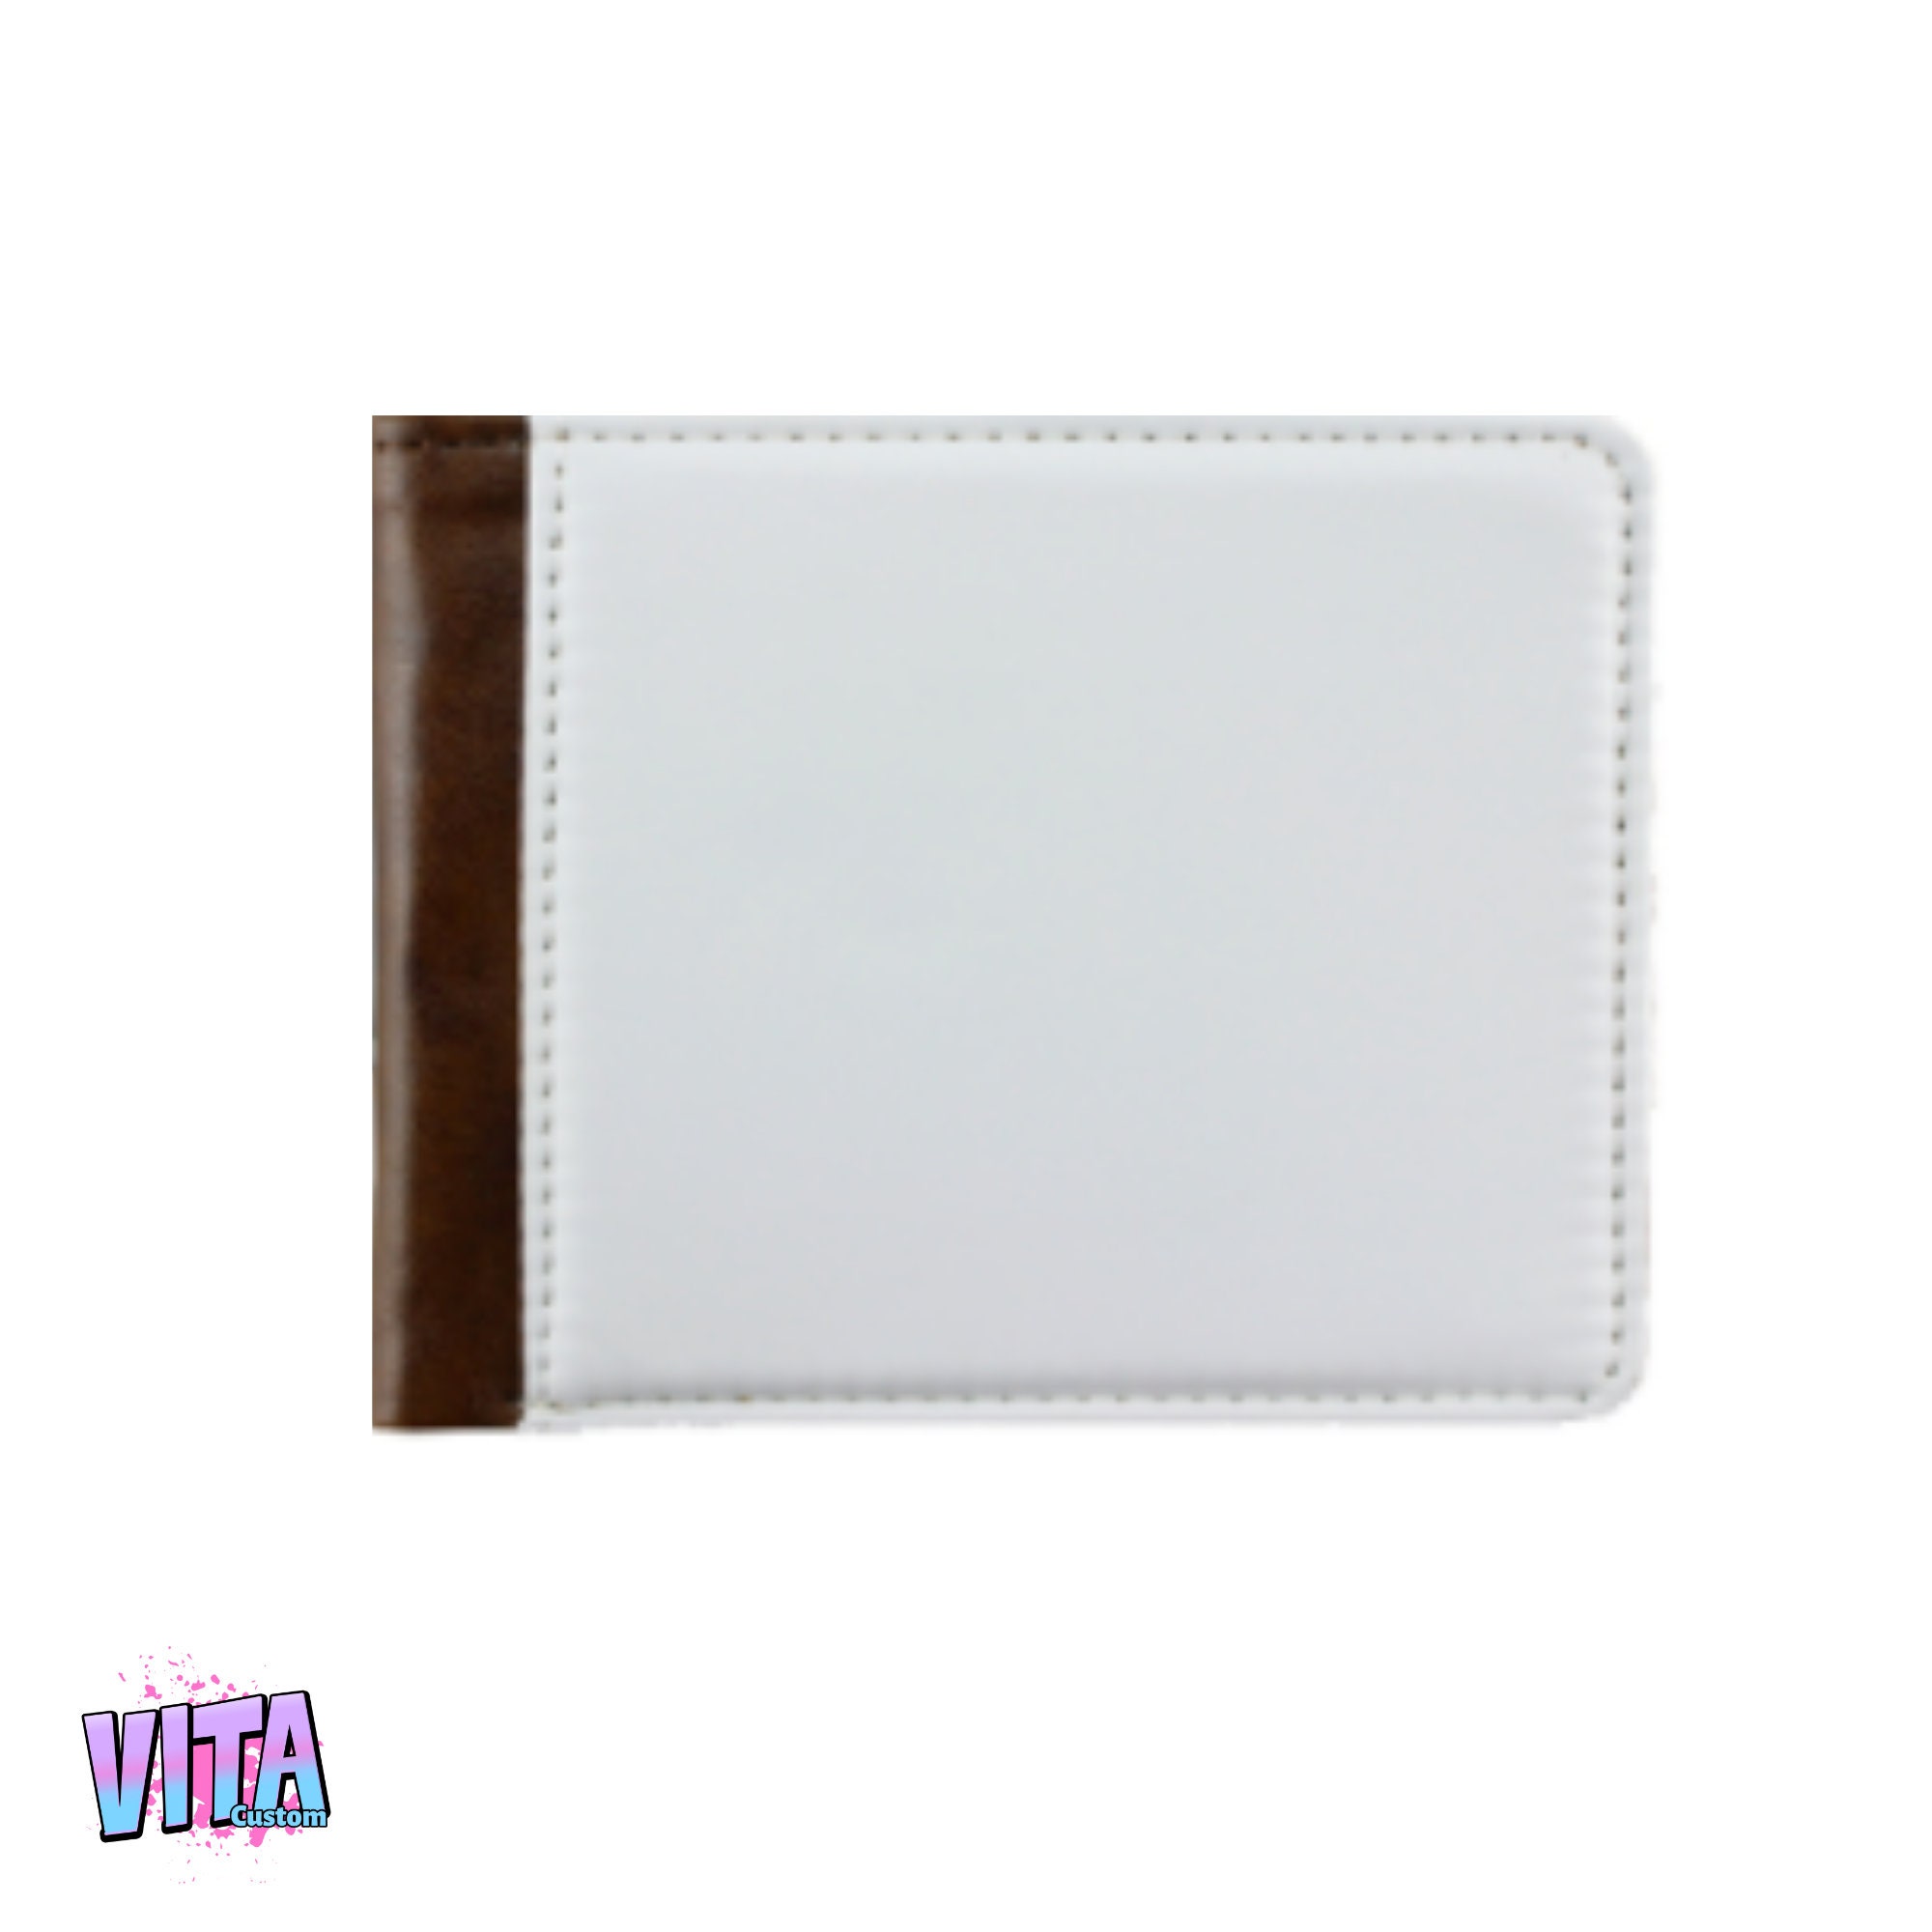 Double sided sublimation wallet with ID slot RTS – ACC Sublimation Blanks &  Designs